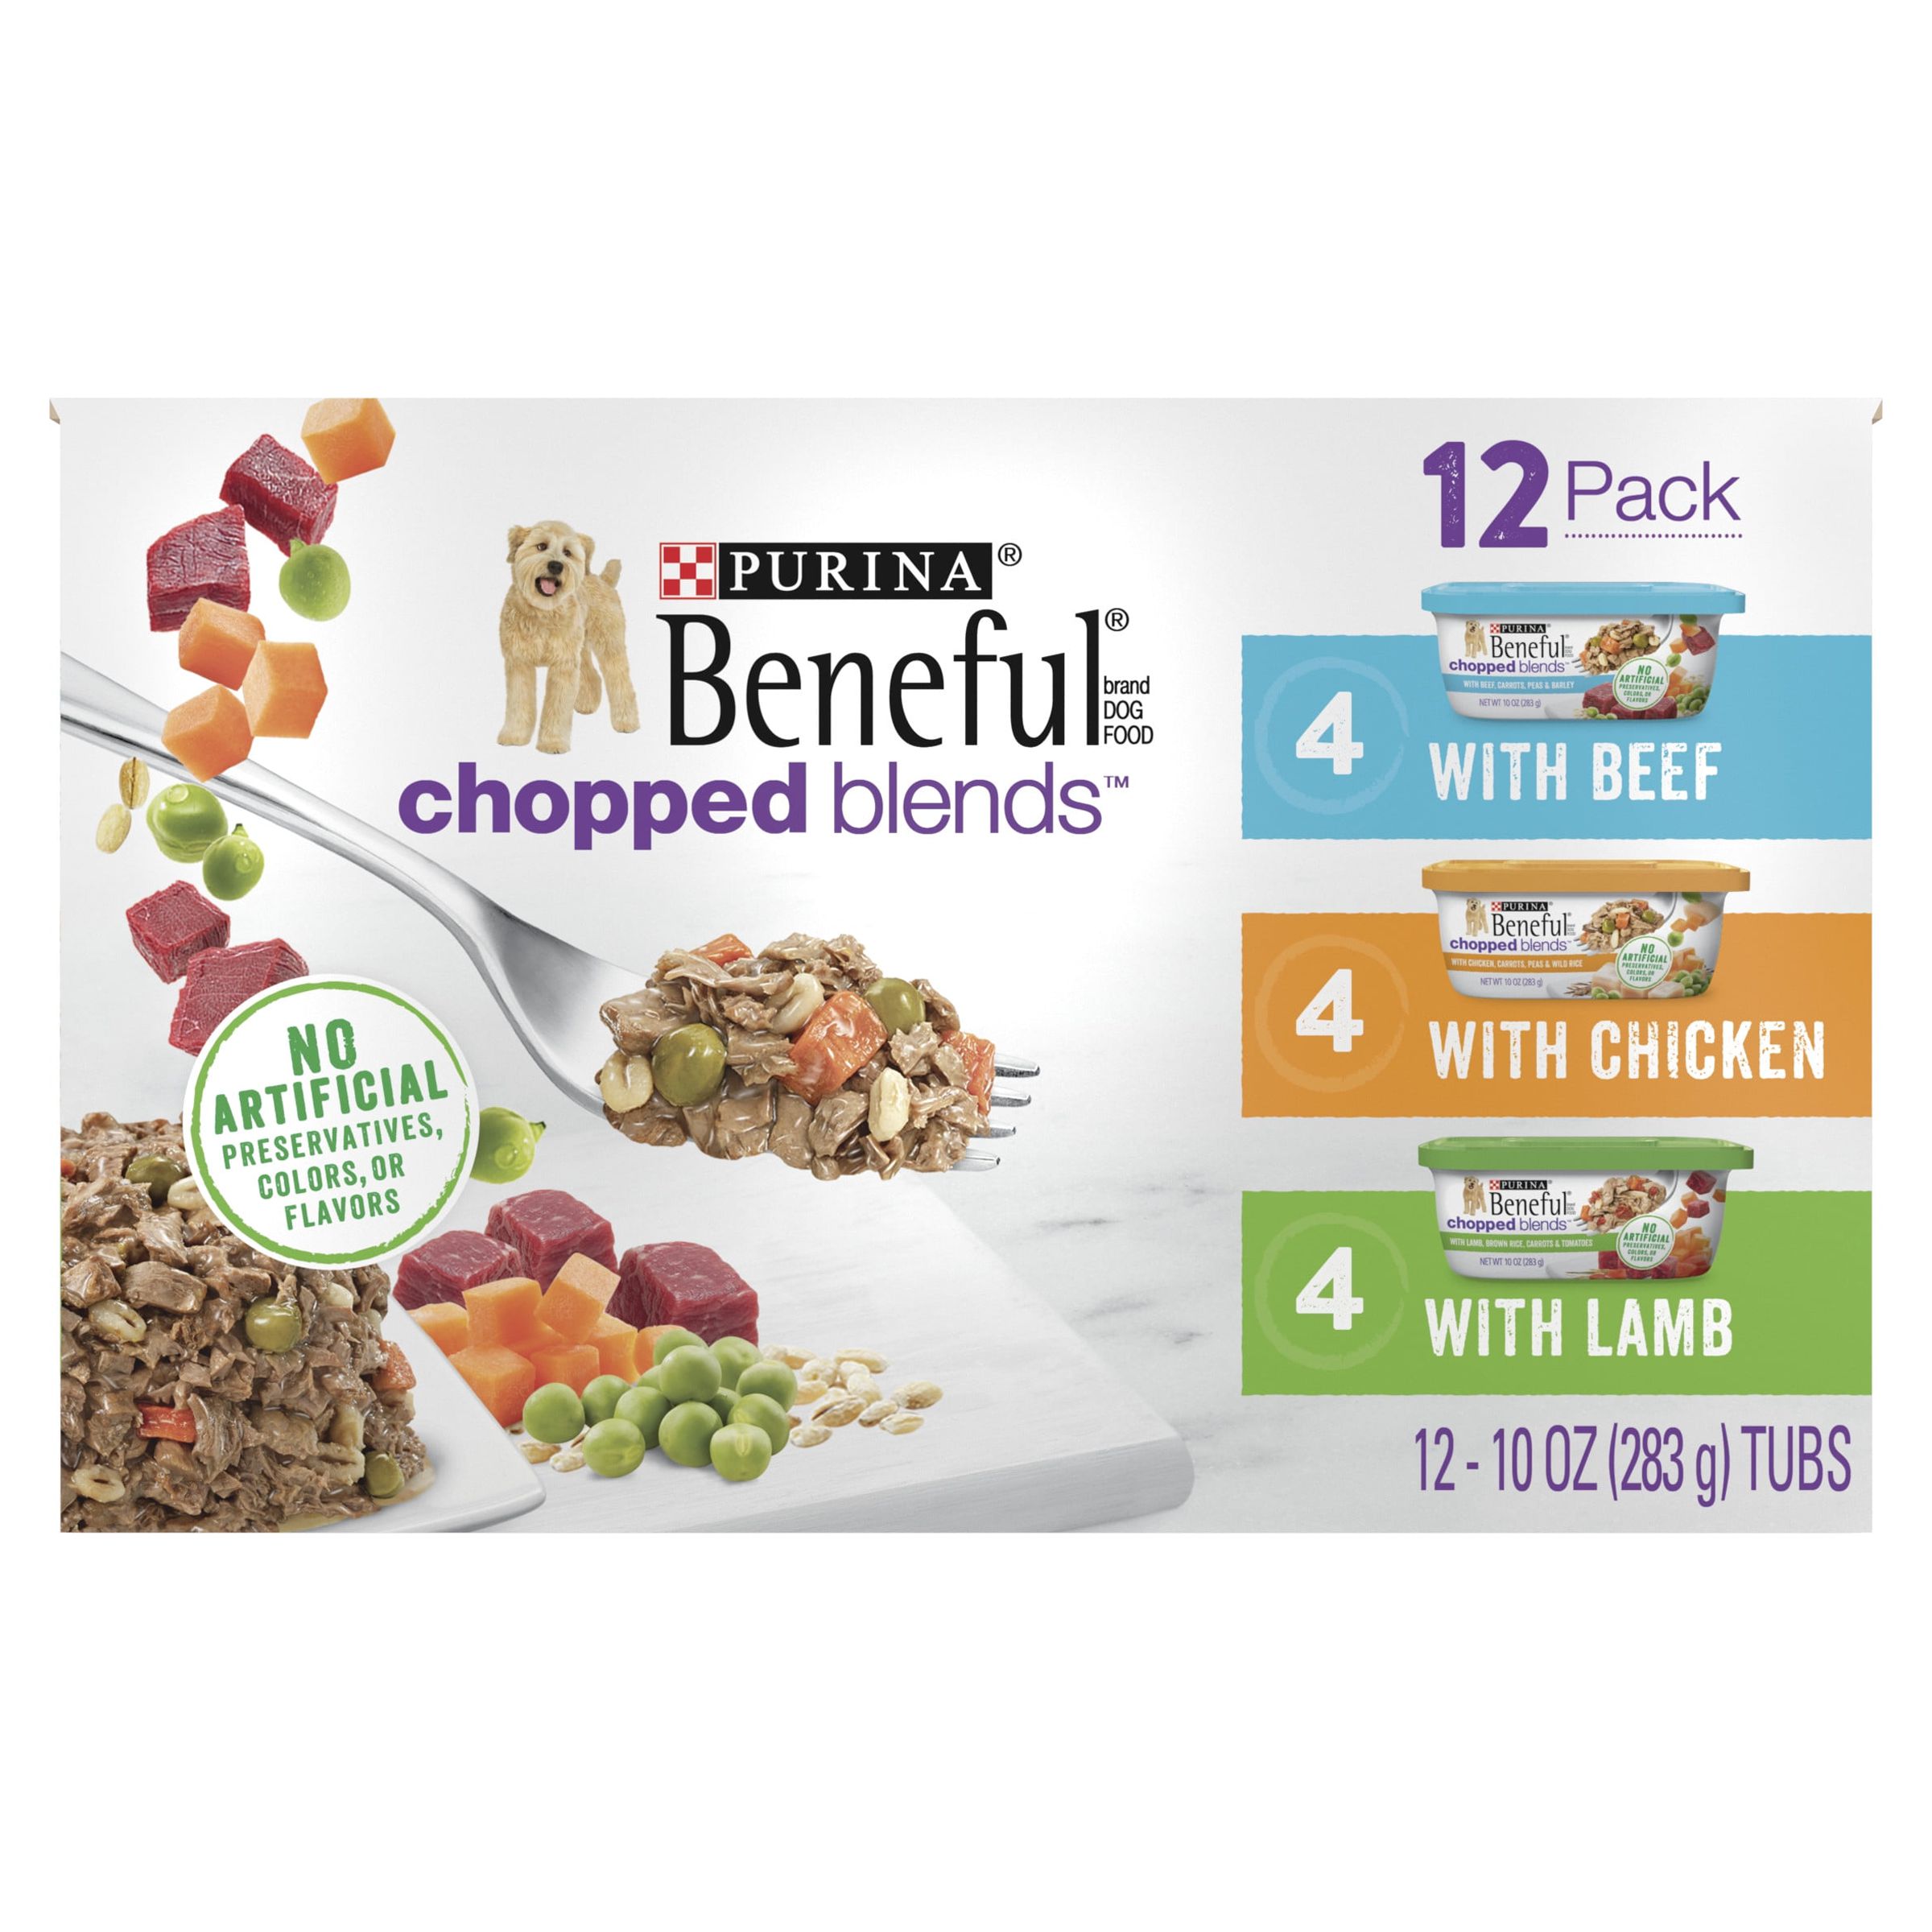 (12 Pack) Purina Beneful High Protein, Gravy Wet Dog Food Variety Pack, Chopped Blends, 10 oz. Tubs - image 1 of 13